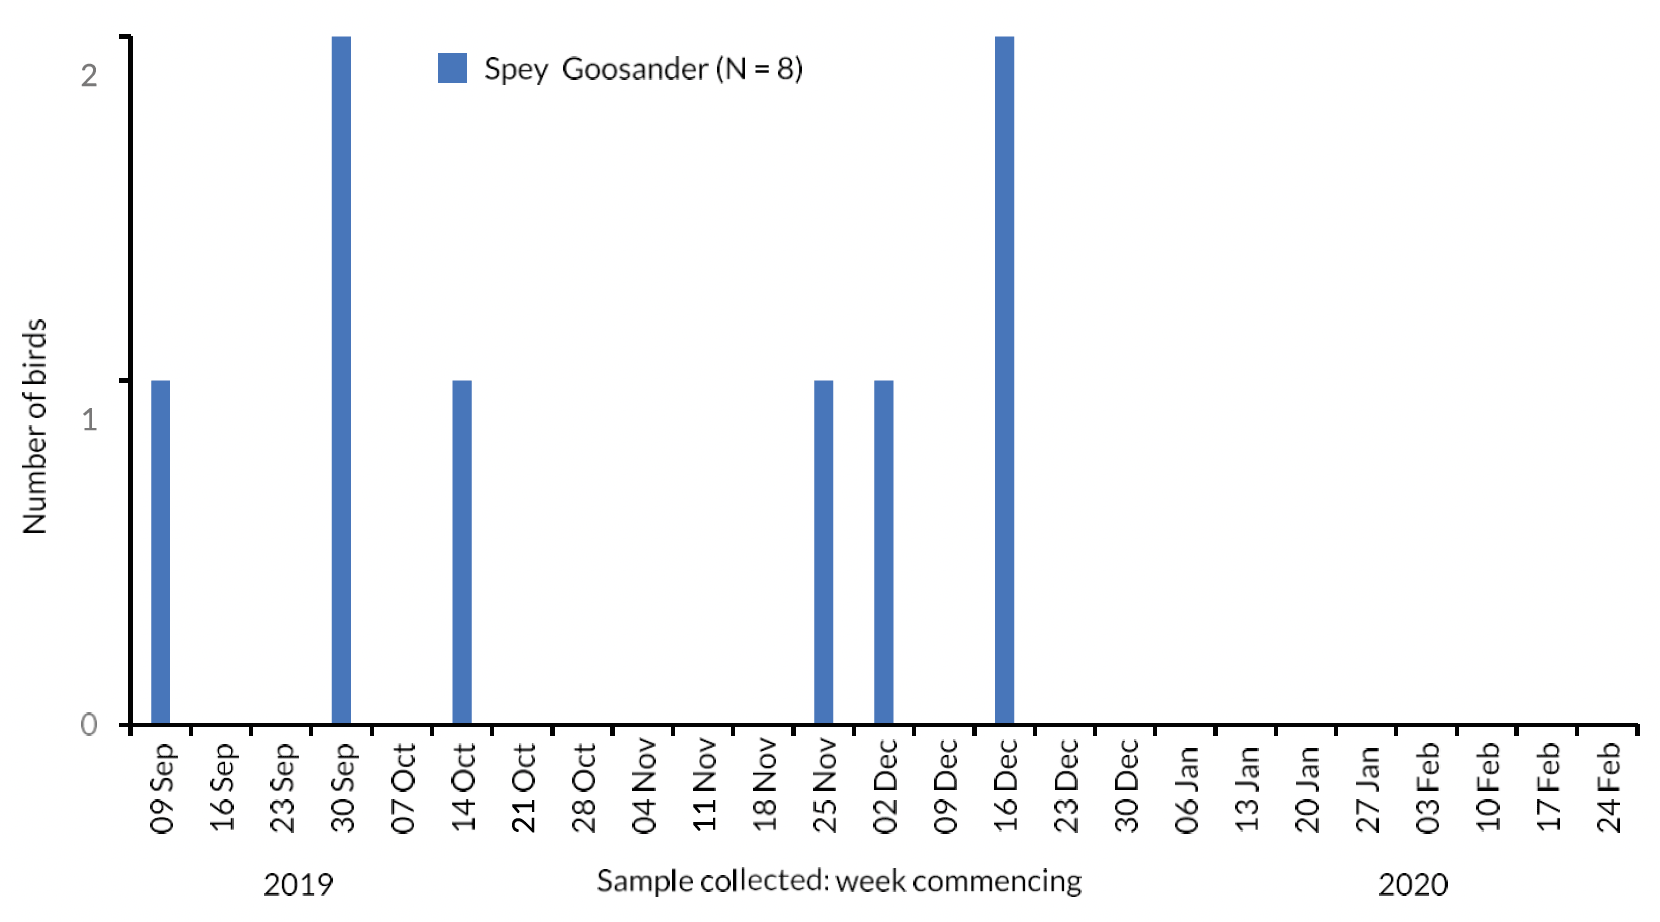 Bar chart of the number of River Spey Goosanders collected each week during the autumn-winter period 2019/20.